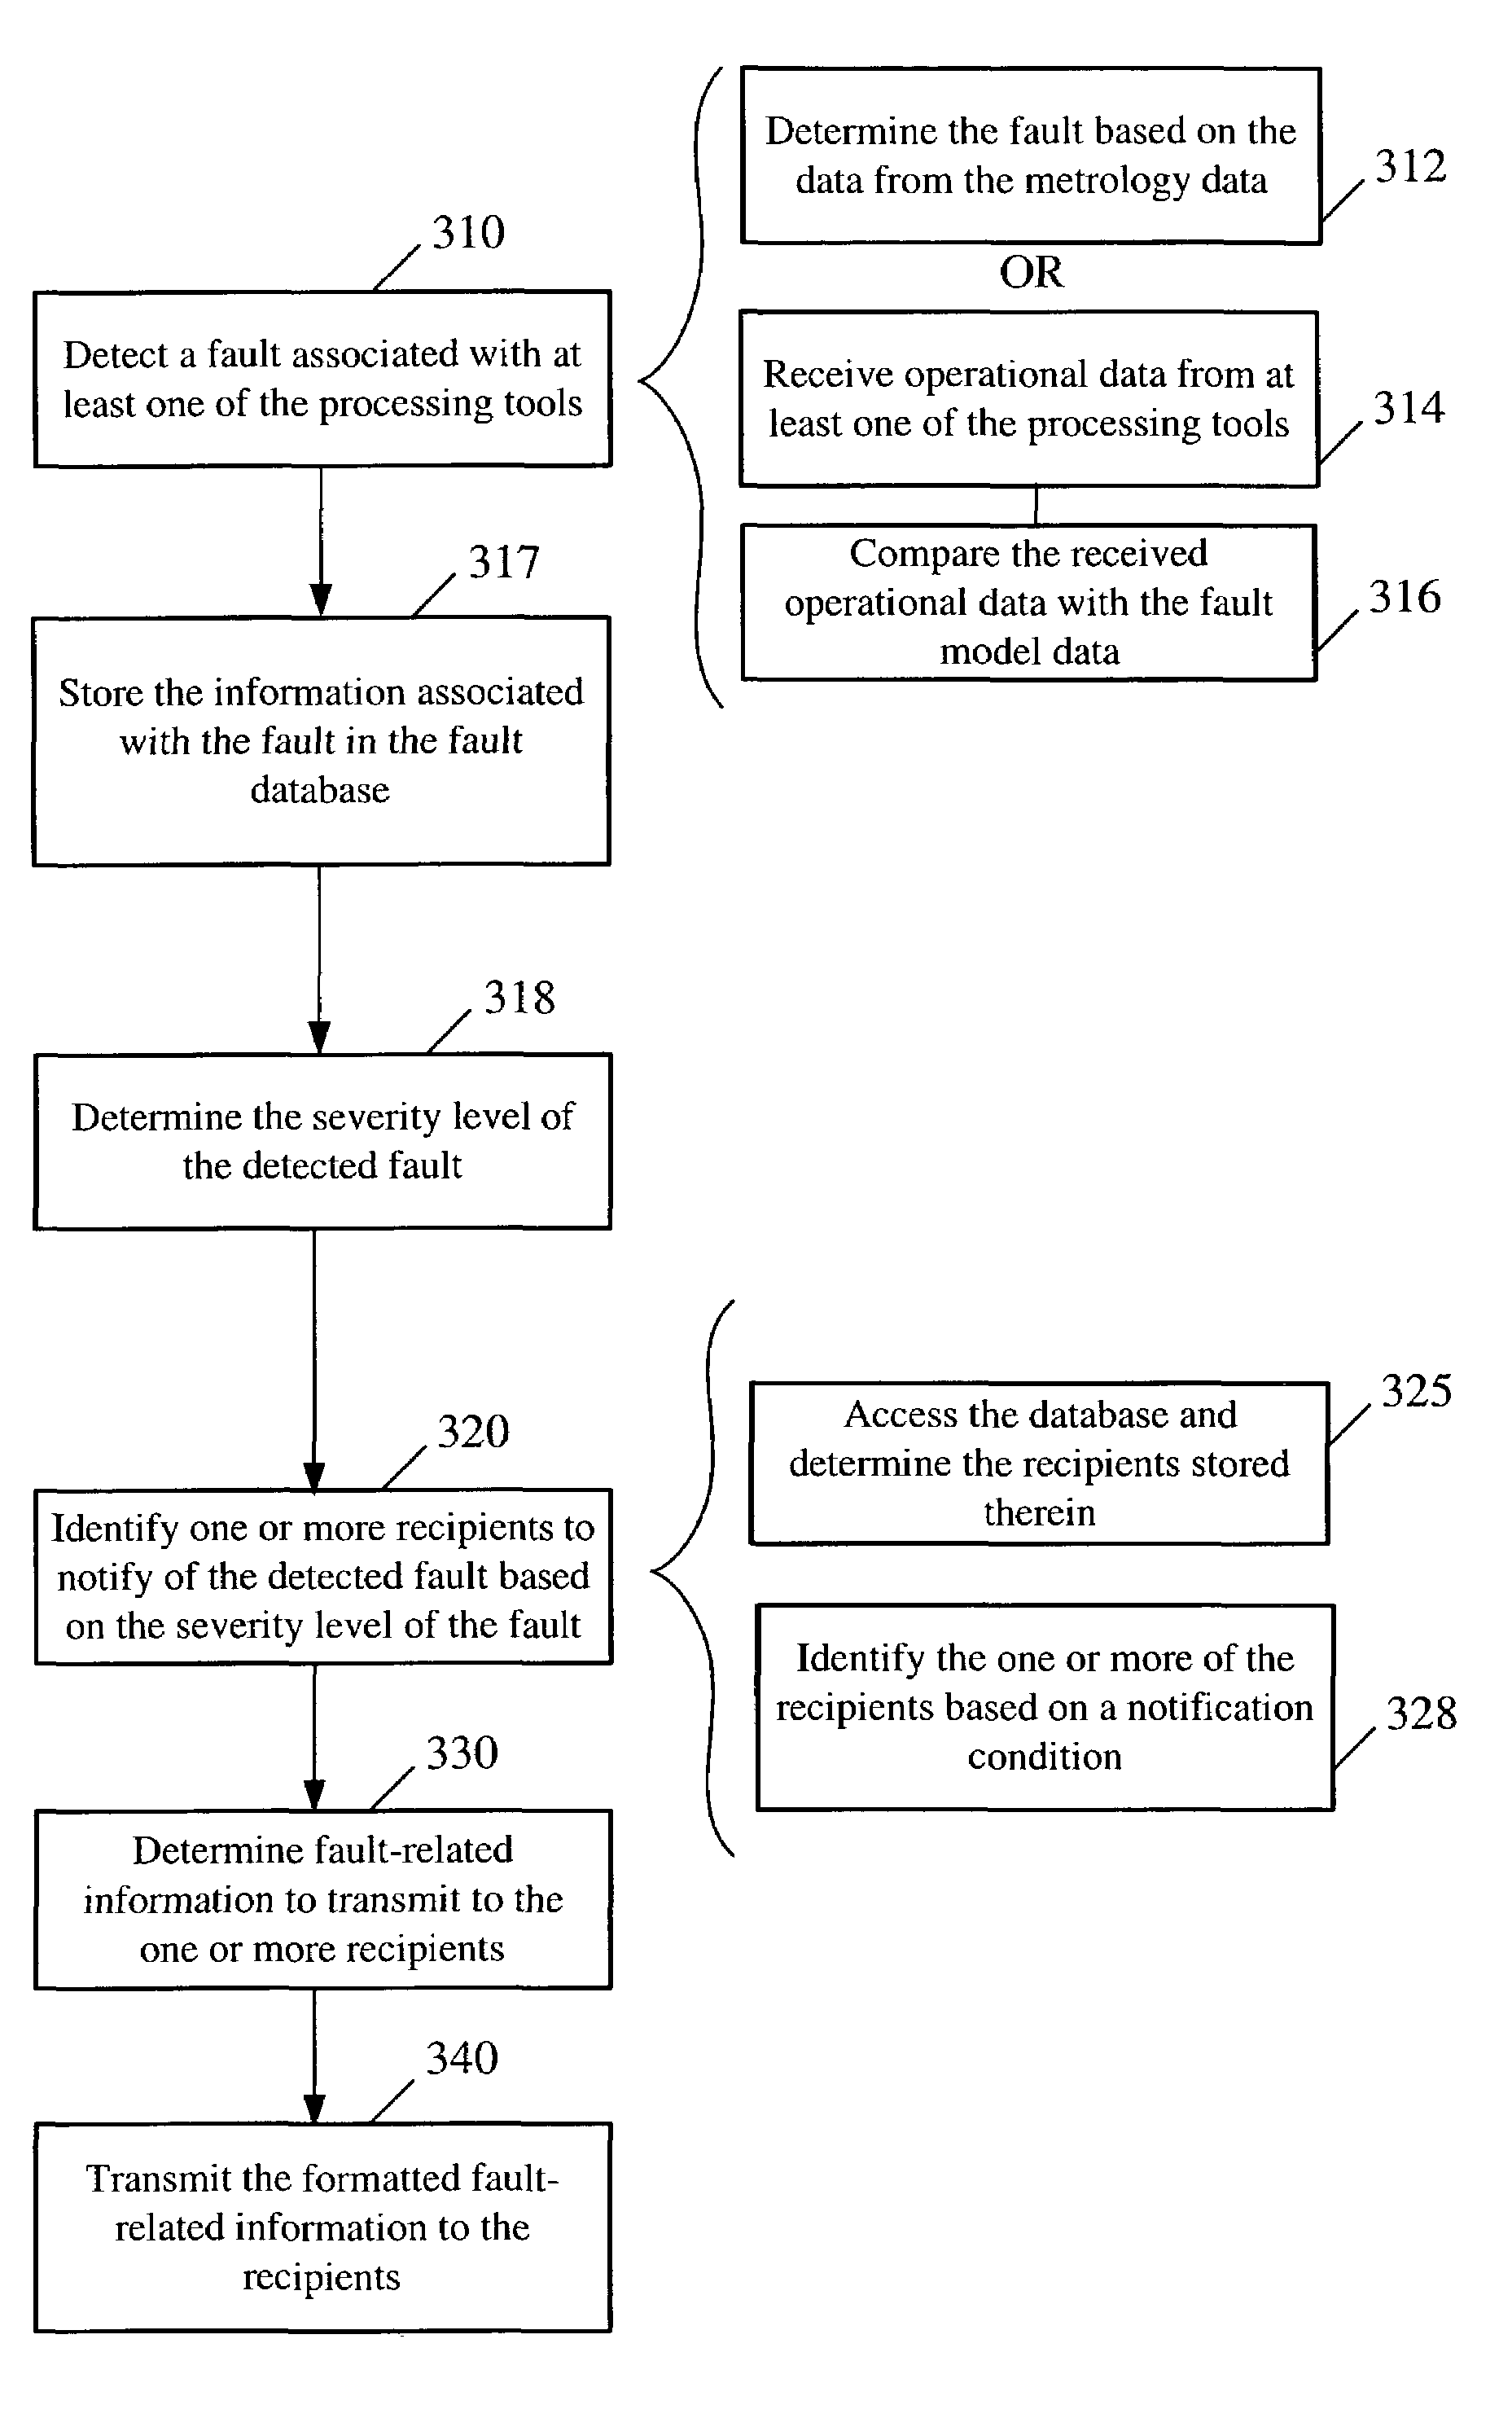 Fault notification based on a severity level